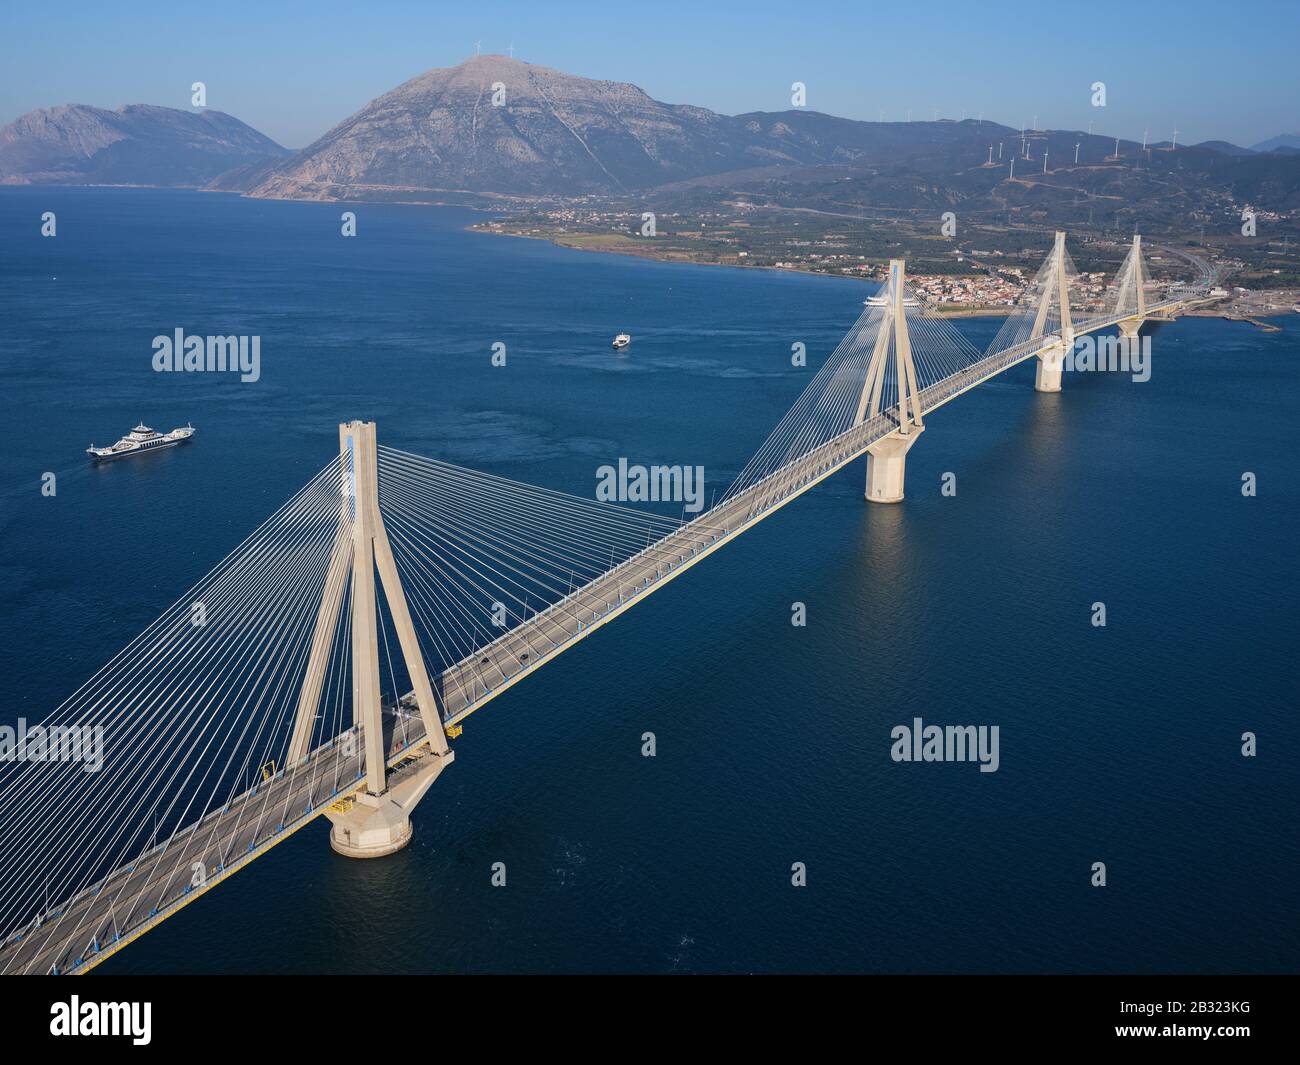 AERIAL VIEW. Large cable-stayed suspension bridge crossing the narrowest part of the Gulf of Corinth. Between the cities of Rio and Antirrio, Greece. Stock Photo